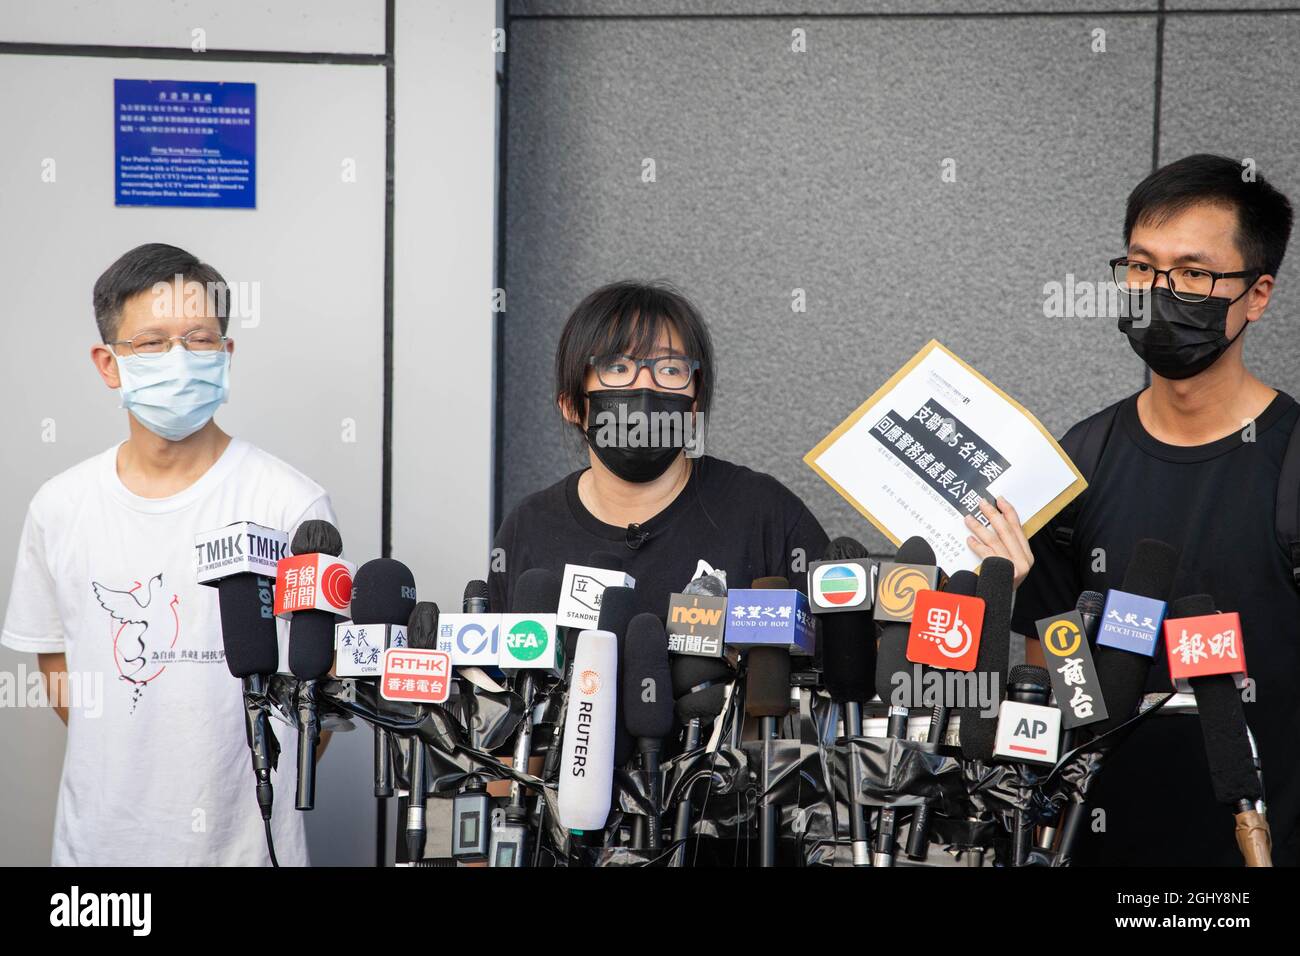 The Vice-chairwoman of Hong Kong Alliance, Chow Hang-Tung along with two standing committee members speak to press and show the rejection letter to national security police.Standing committee members of the Hong Kong Alliance in Support of Patriotic Democratic Movements of China have rejected information request on its membership, finances and operations, and went to Hong Kong Police Headquarters to officially hand in their rejection letter. The secretary of security Chris Tang Ping-keung later spoke to the press this afternoon on the issue, claiming officials will take legal action soon. The Stock Photo